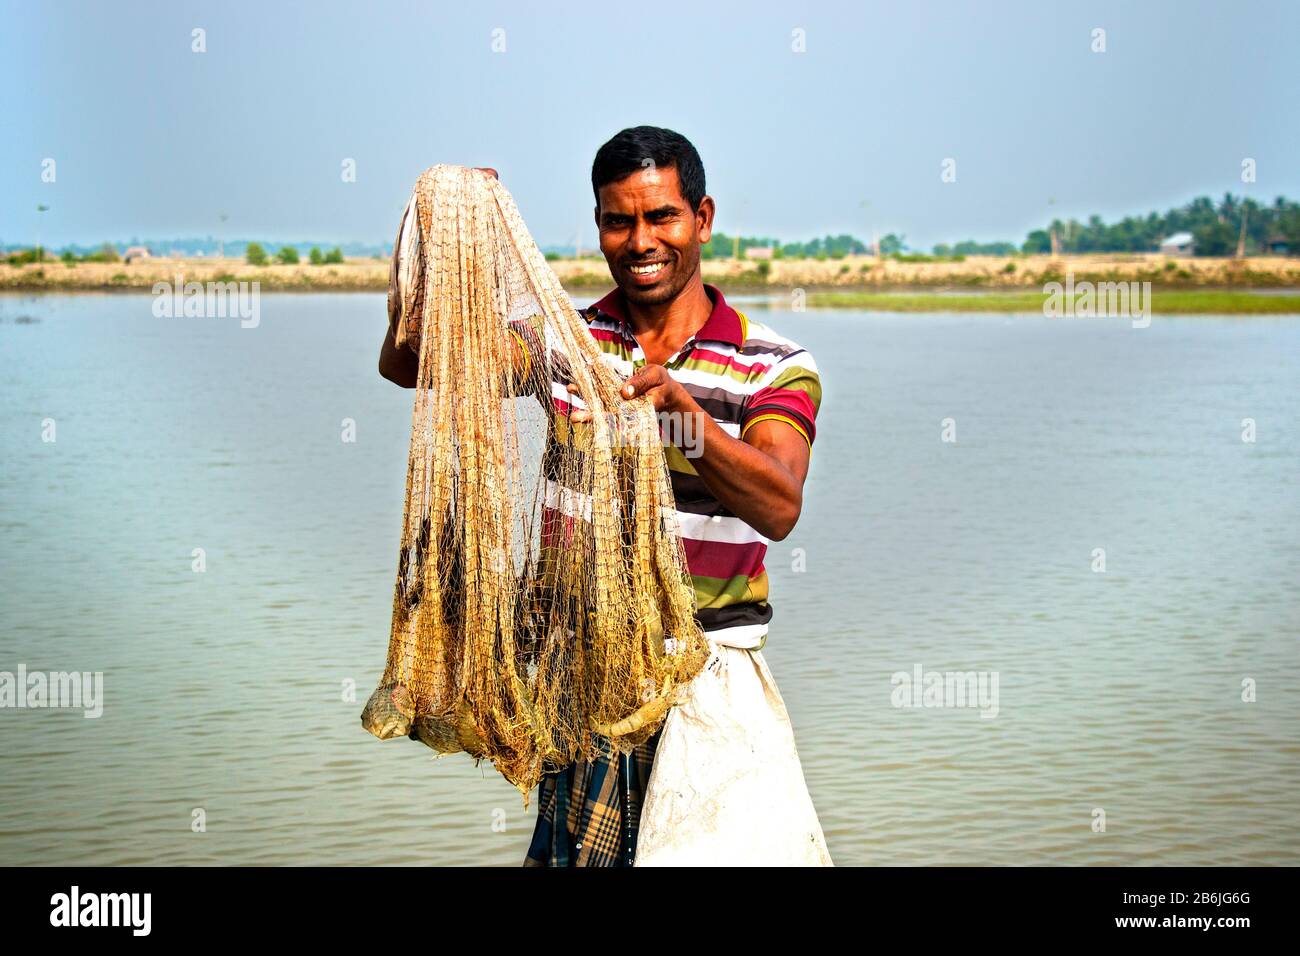 A fish farmer is showing his harvest with happy face. There are some shrimps in his net. Shrimp and prawn called white gold for Bangladeshi economy. Stock Photo